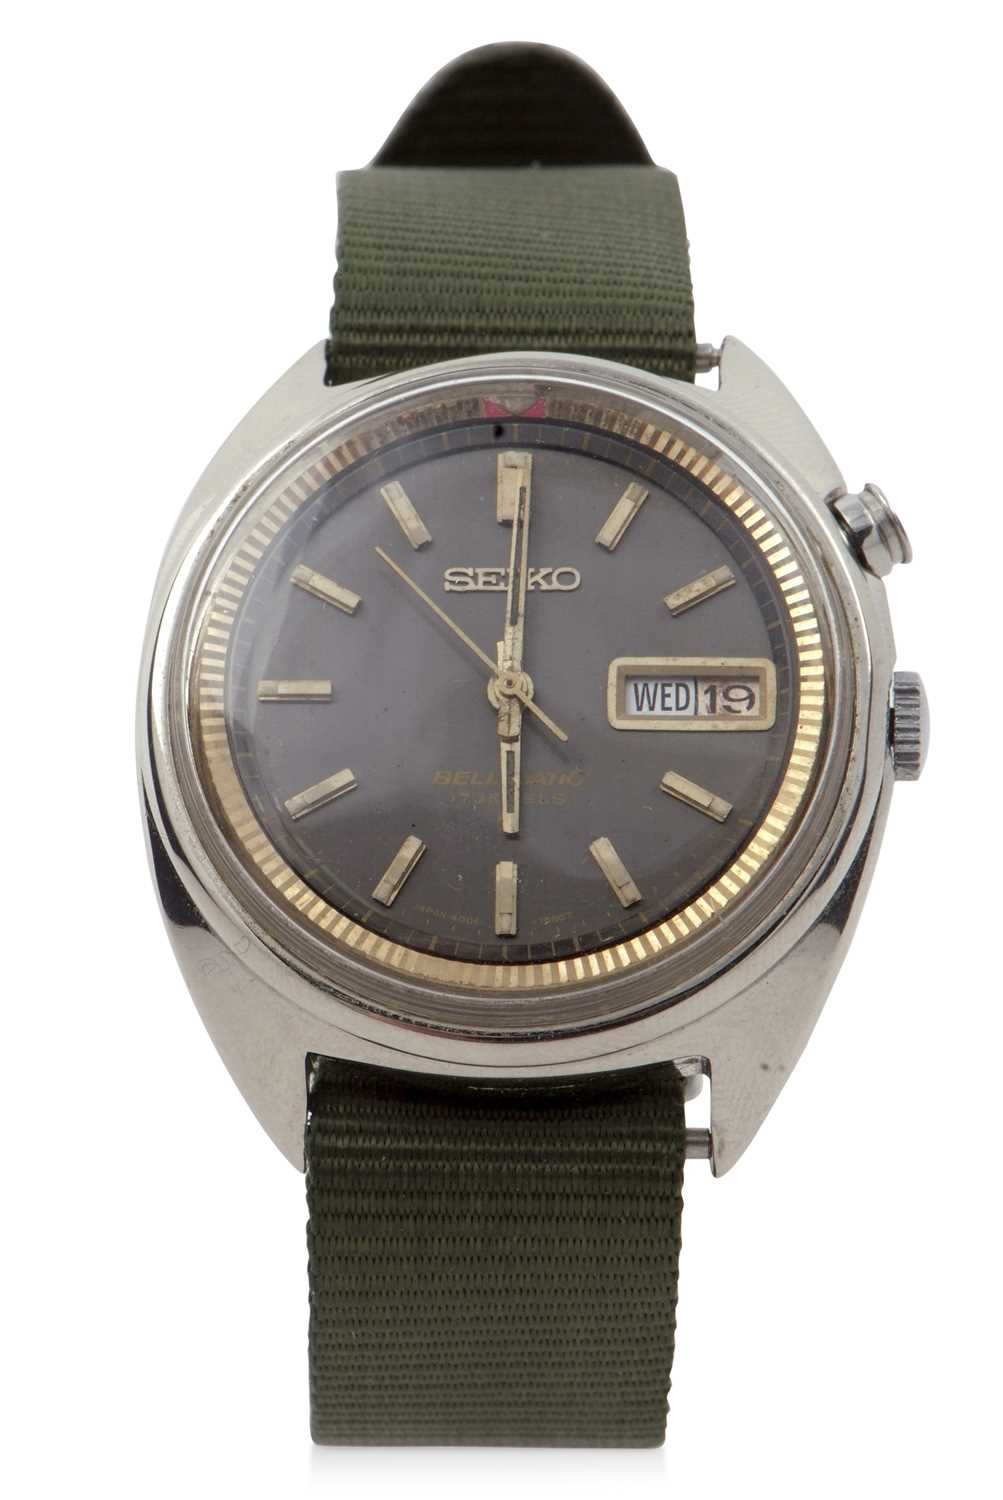 A vintage Seiko Bellmatic 4005-7000, the watch has a stainless steel case with black dial and gold